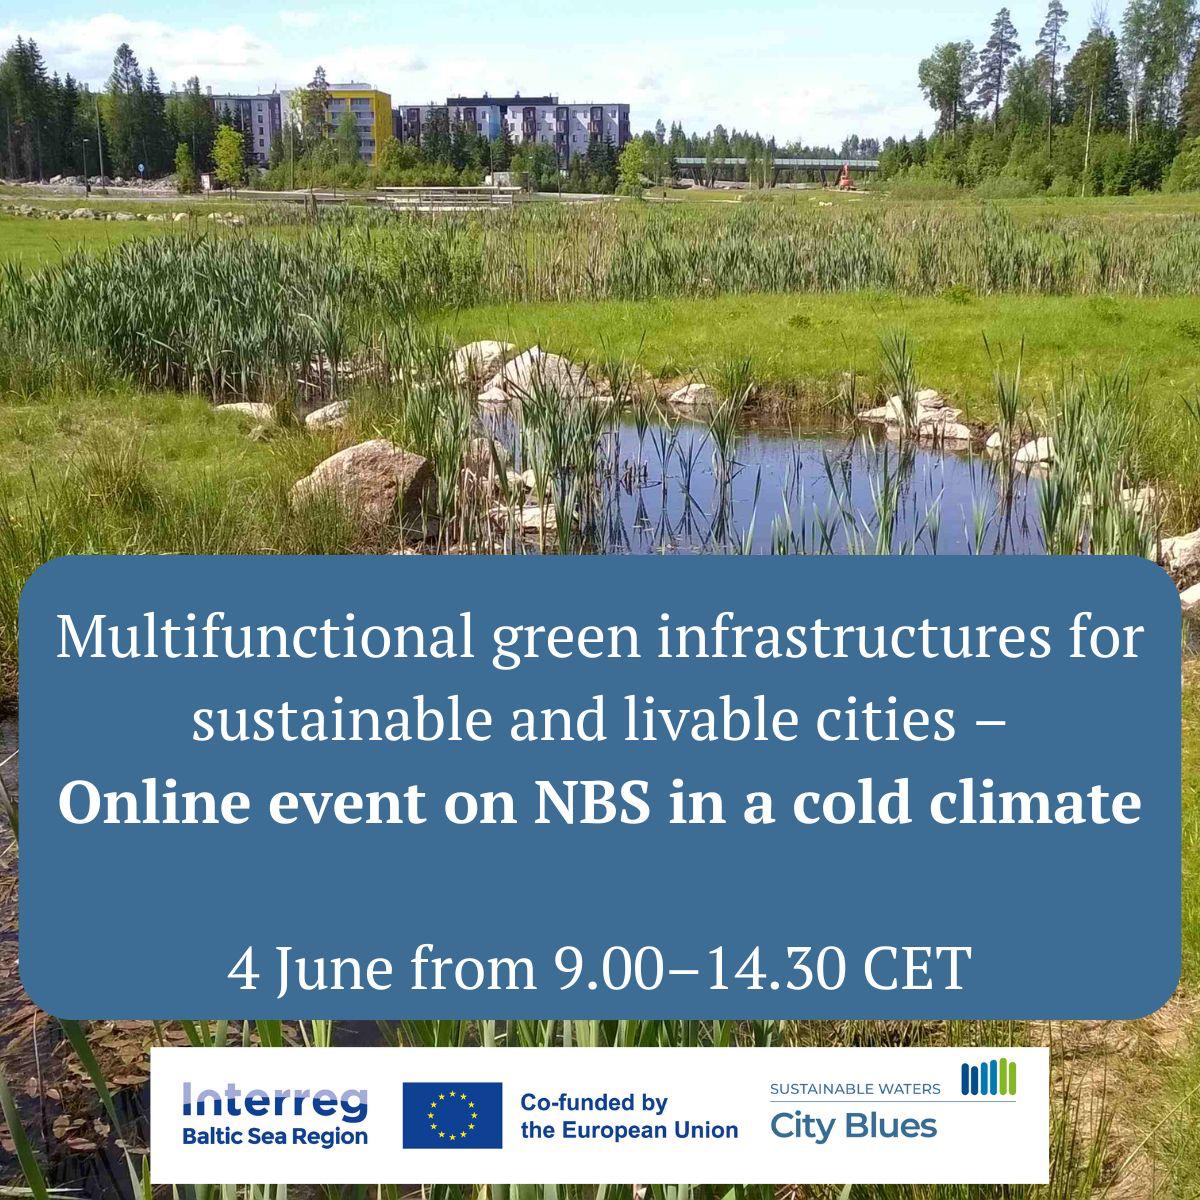 Interested in nature-based solutions around the Baltic Sea? #CityBlues project invites you to follow the seminar online on Tue 4 Jun. Programme and registration: forms.office.com/e/FZH3A5K0BF